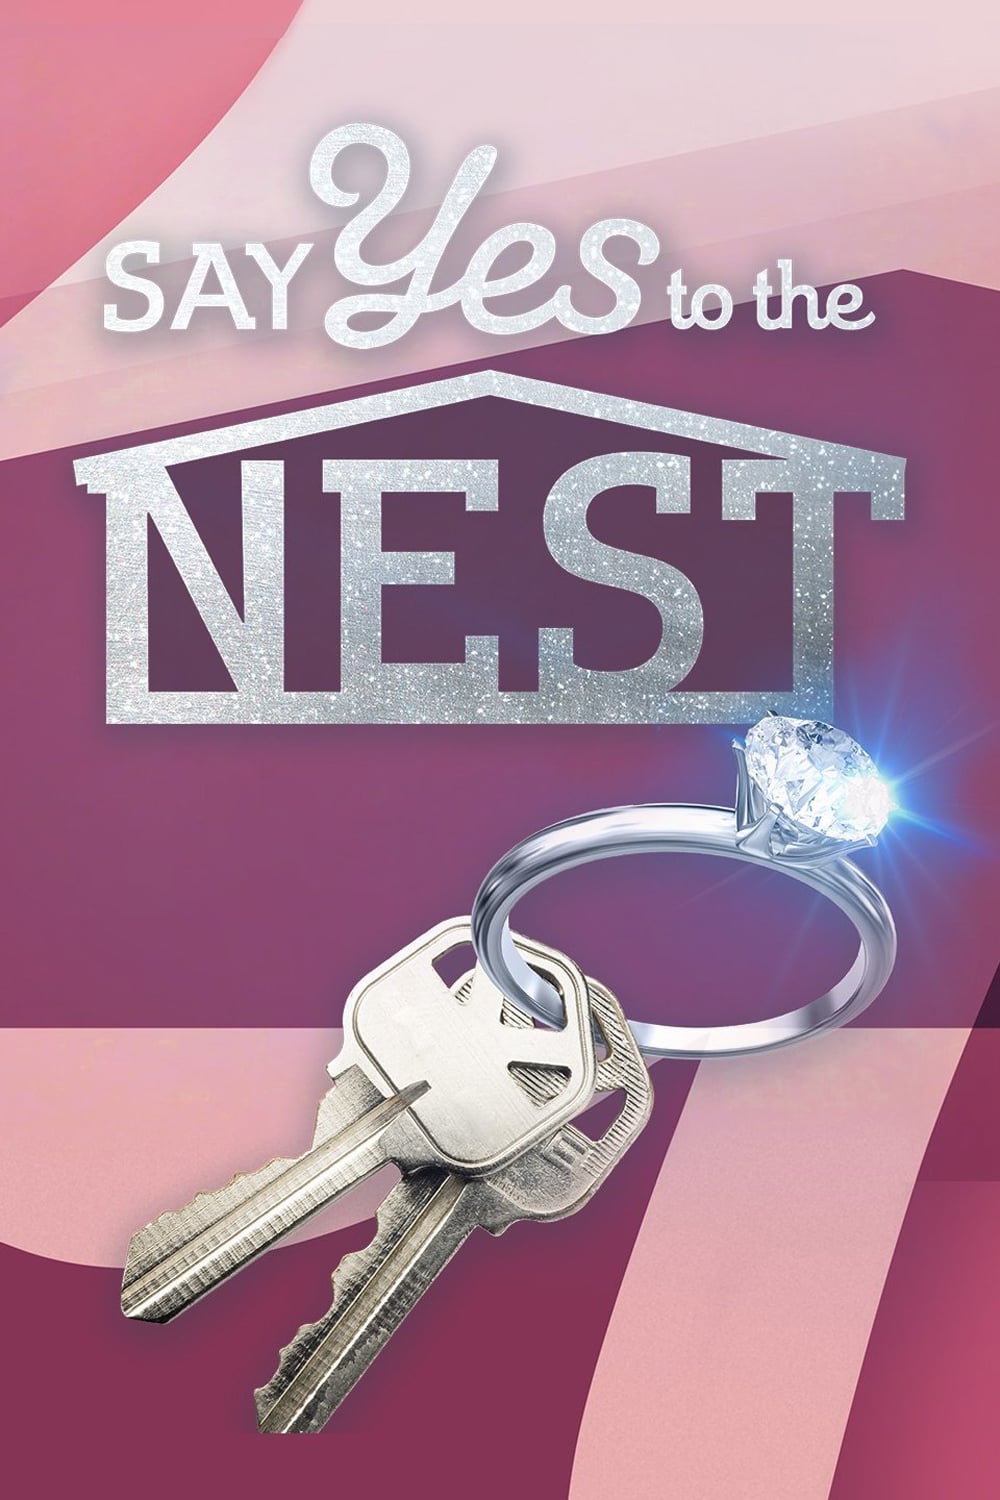 Say yes to the nest!